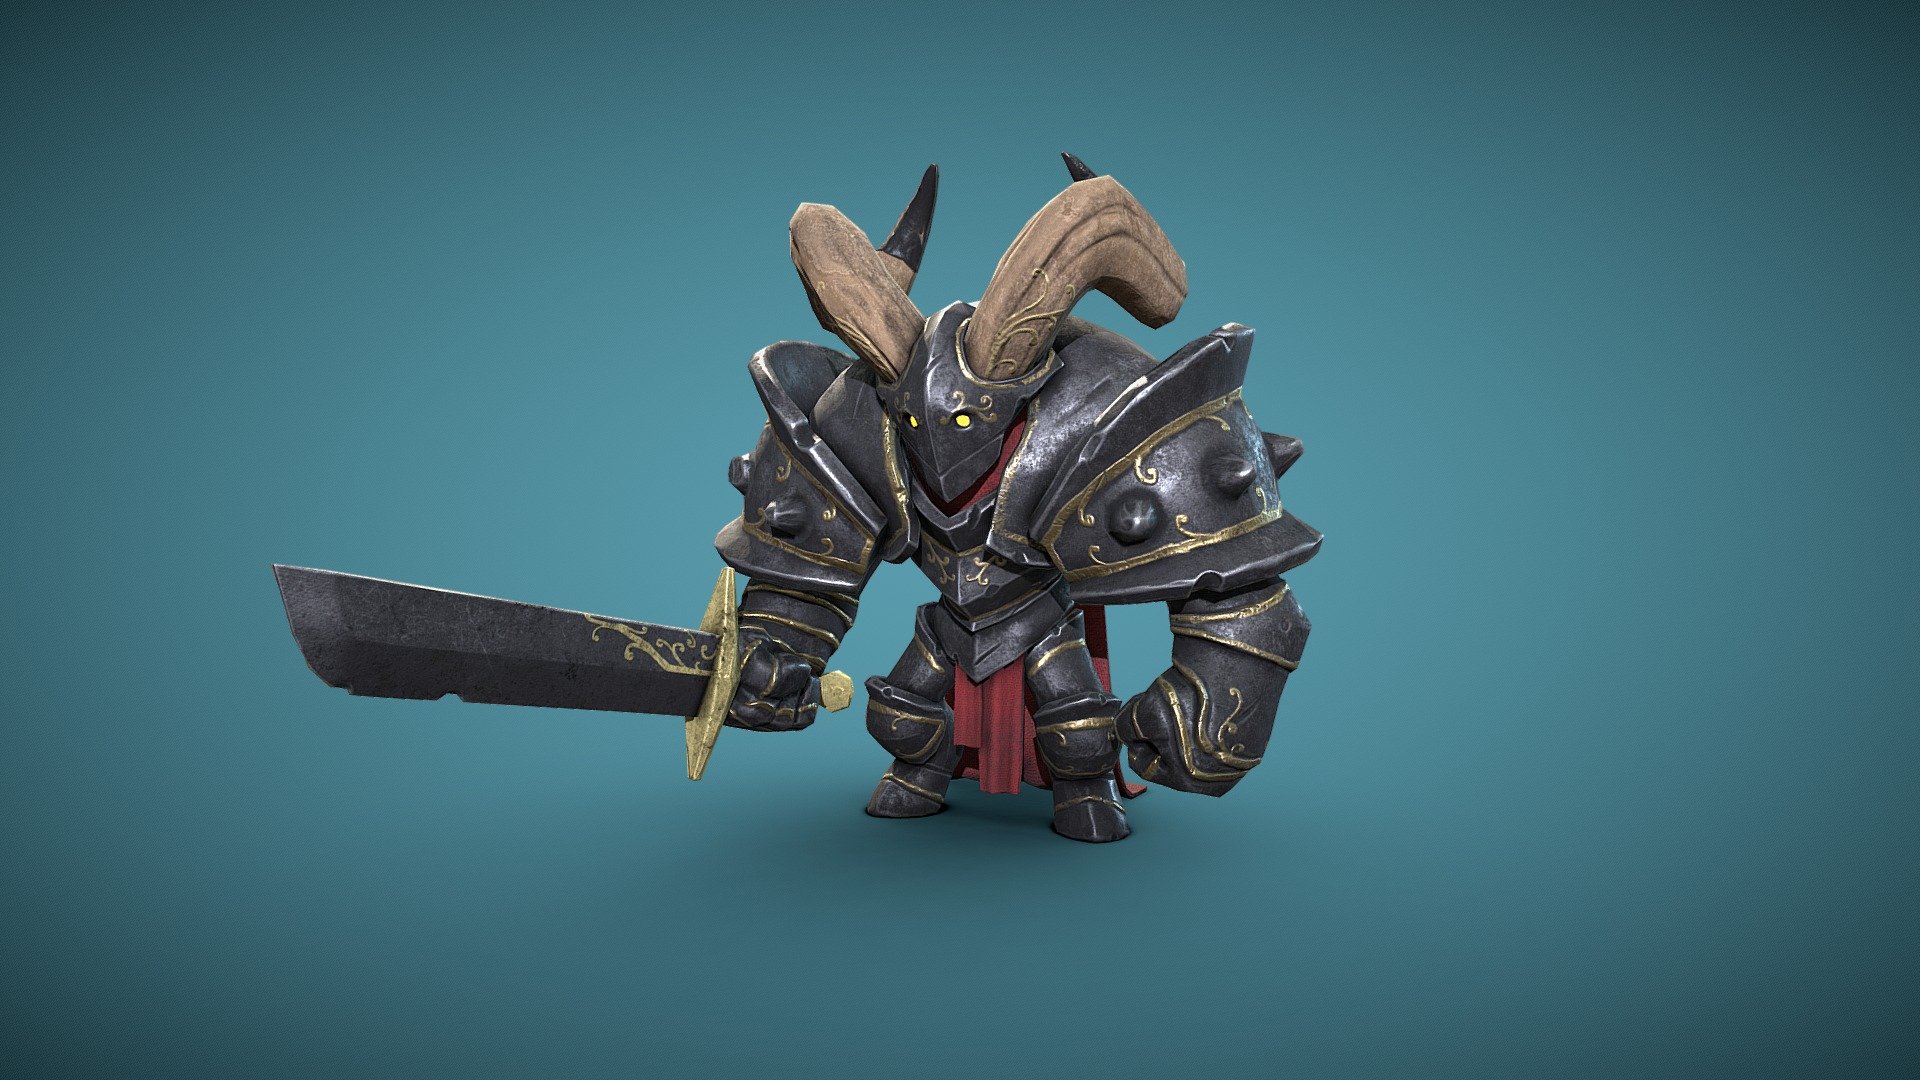 the course itself: https://www.artstation.com/marketplace/p/YdgB/absolute-beginners-substance-painter-course?utm_source=artstation&amp;utm_medium=referral&amp;utm_campaign=homepage&amp;utm_term=marketplace

This is a knight that i made in Zbrush for the Absolute beginner Zbrush course, then retopologized and UV unwrapped in Absolute beginners retopology and UV unwrap in 3dsMax course and finally textured in Substance painter in the Absolute beginners Substance painter course :). 

Zbrush course: https://www.udemy.com/course/absolute-beginners-zbrush-course/?referralCode=91D29CEE5EB077868A8F
Retopology course: https://www.udemy.com/course/absolute-beginners-retopology-and-uv-unwrapping-in-3dsmax/?referralCode=4BD769C97086CD6D4092
Substance painter course: Almost done! - Knight Substance Painter course - 3D model by nikohard 3d model